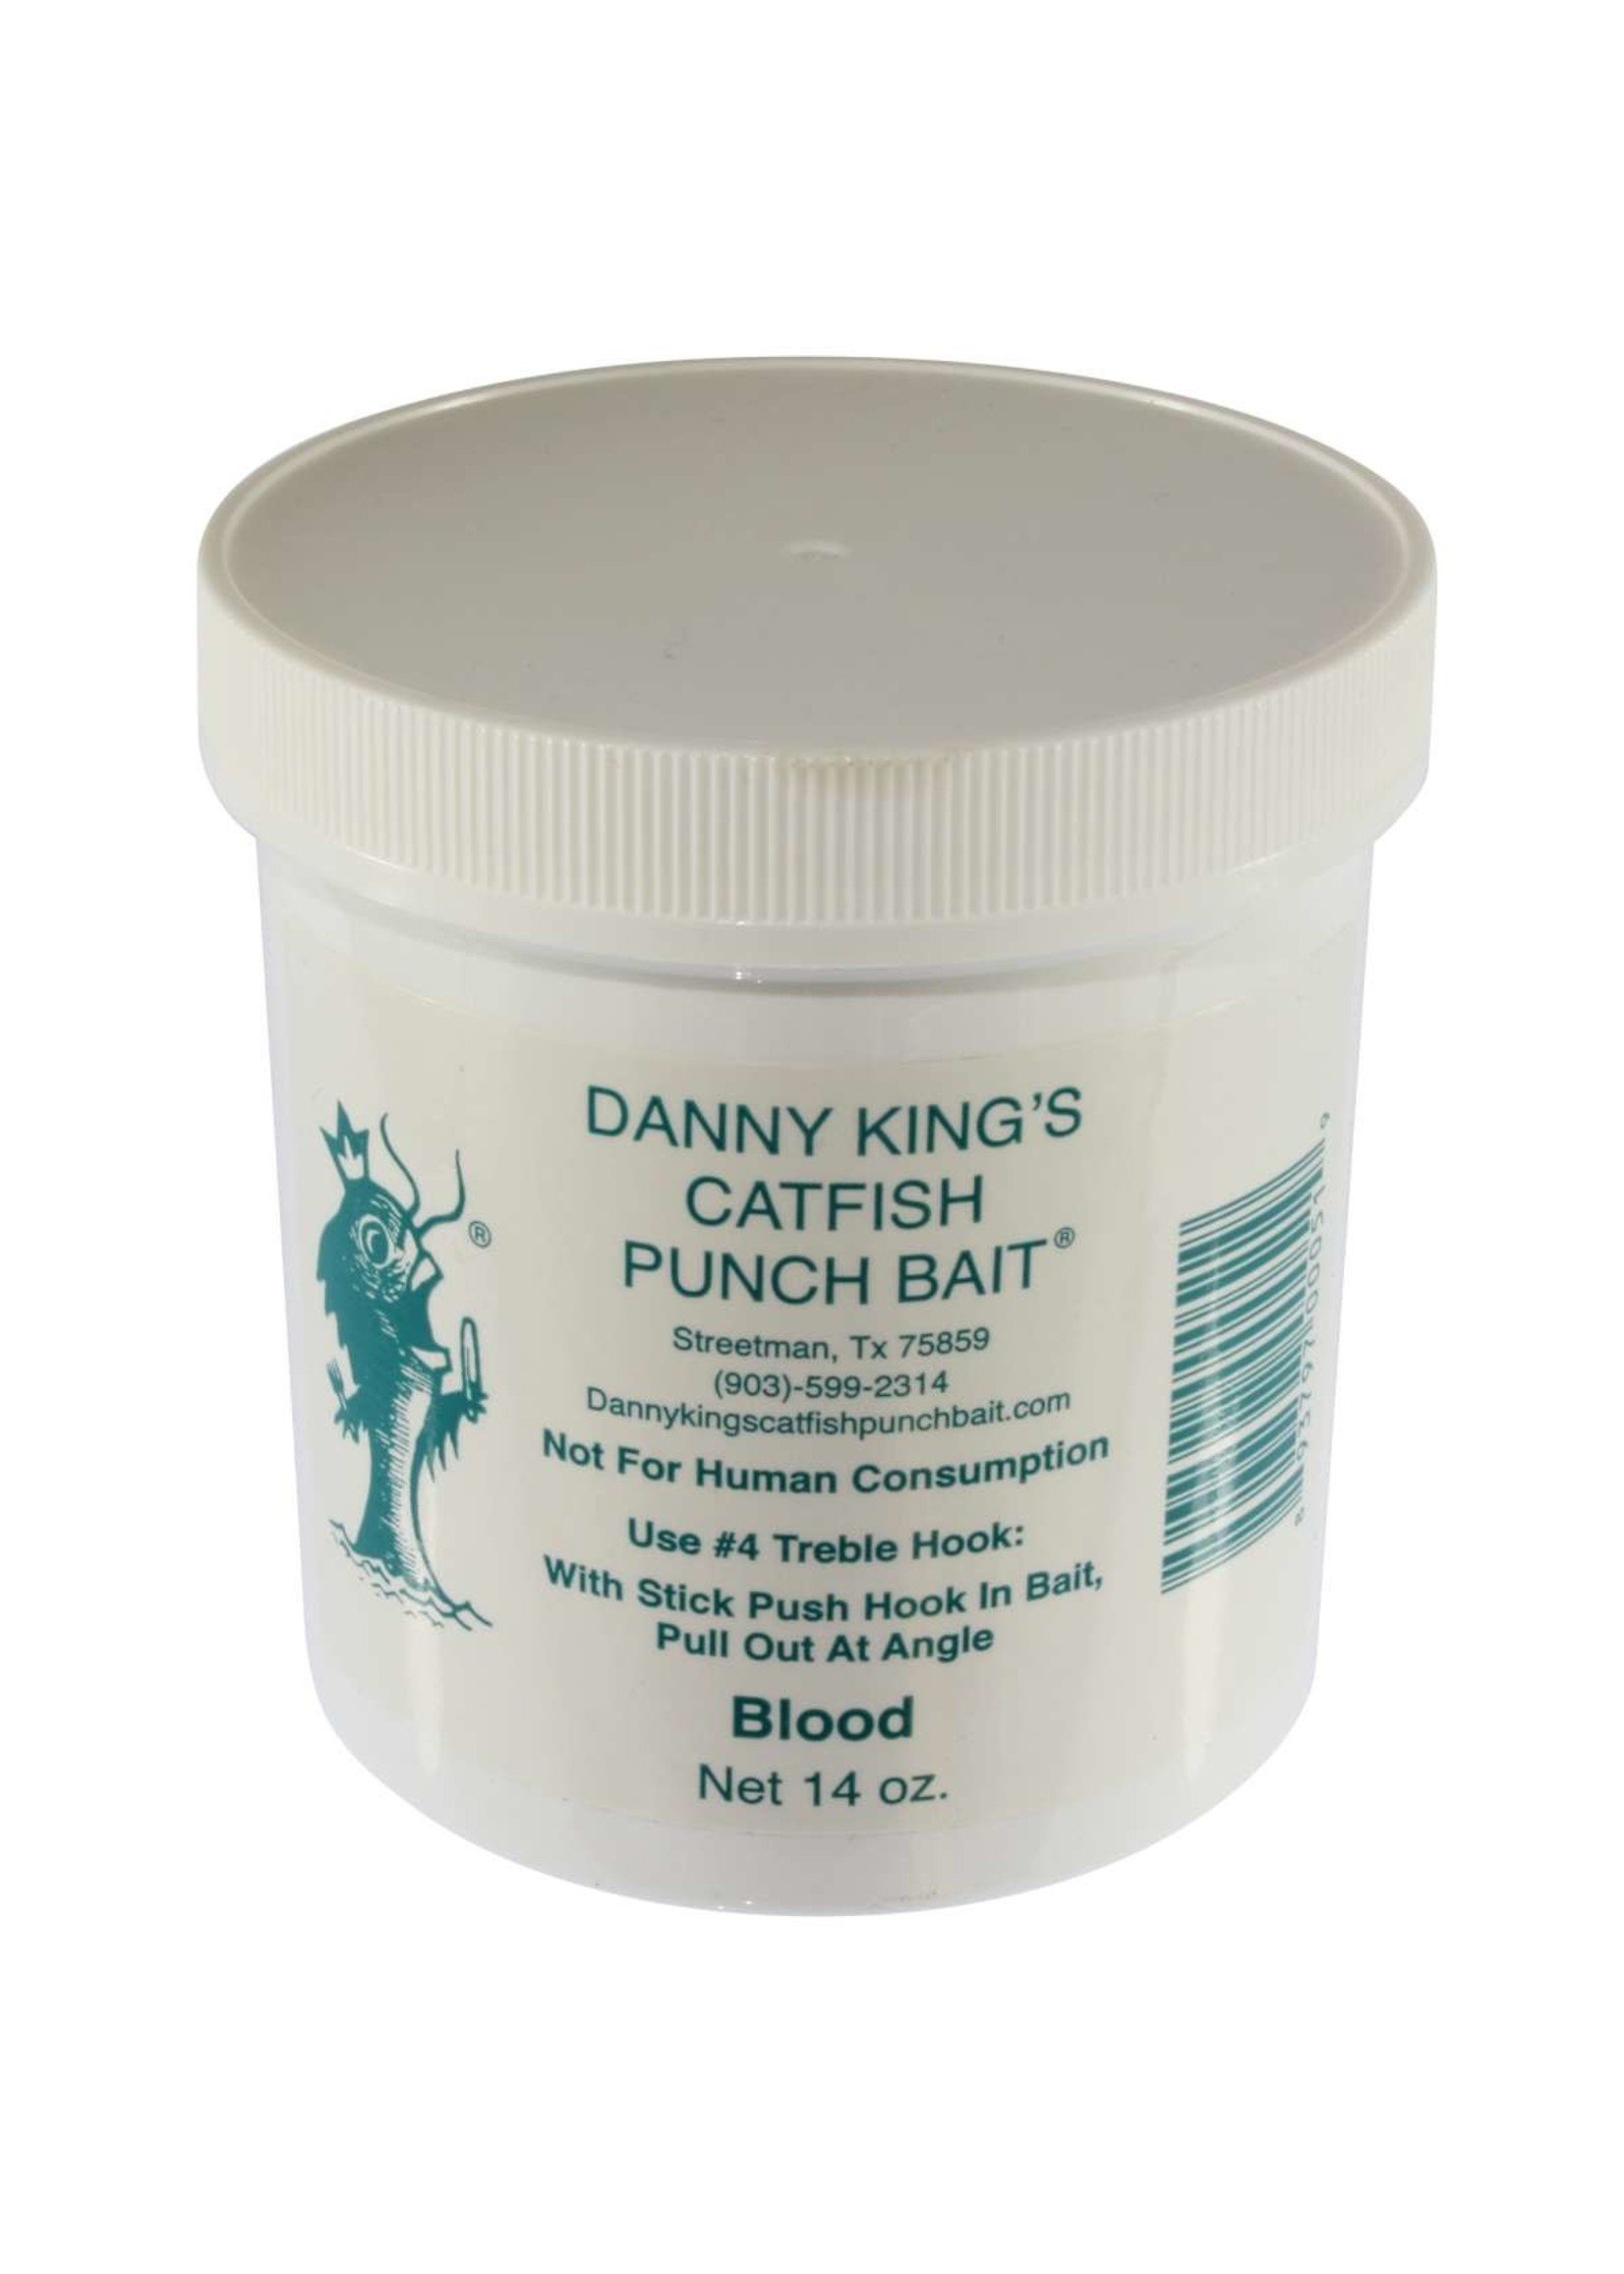 Danny King's DANNY KING'S CATFISH PUNCH BAIT - Rugged Shoal Outfitters